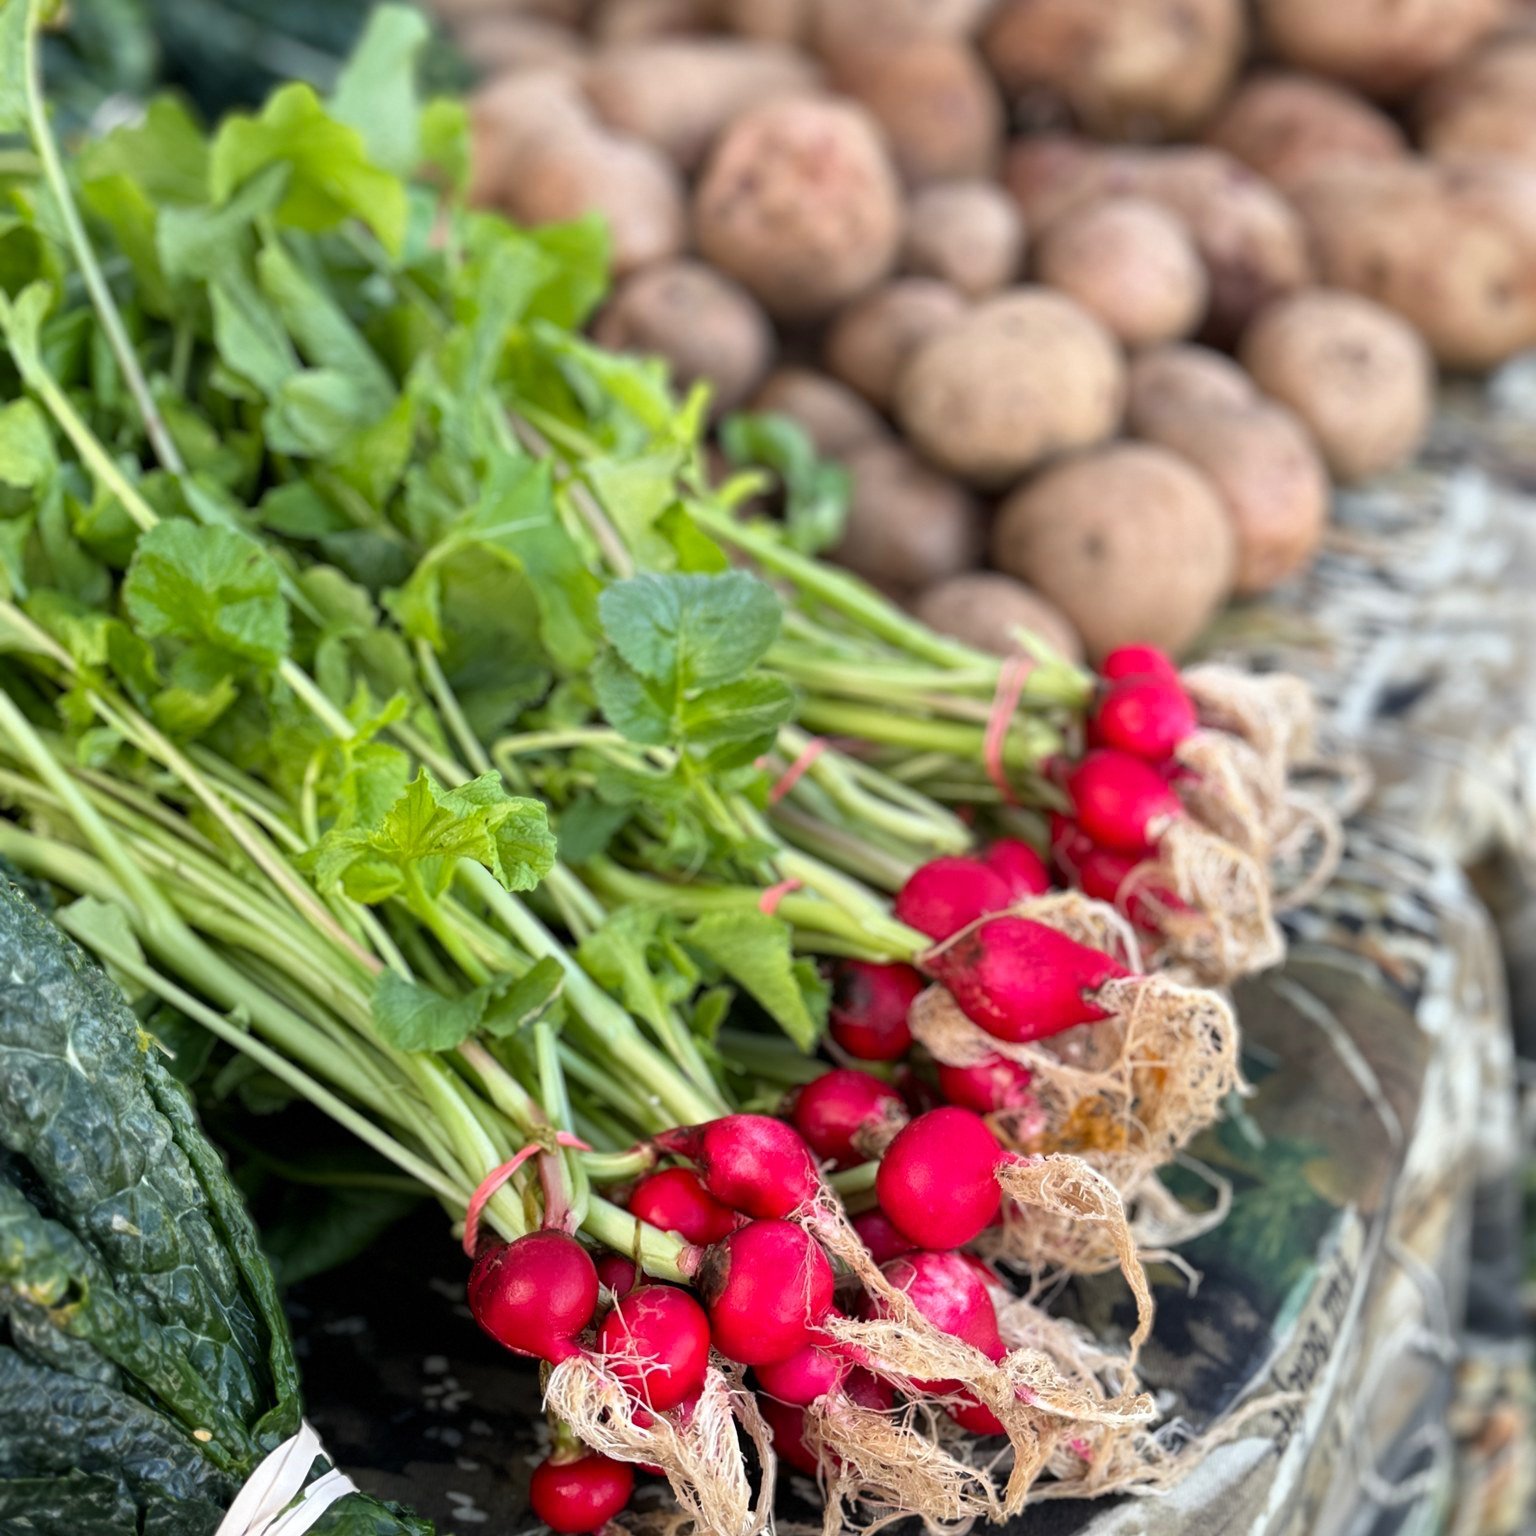 May in Tennessee usually means 🍓 STRAWBERRIES 🍓! But what else is available? Check out the list below!

🌱Asparagus
🥦Broccoli
🌿Cabbage
🌱Cauliflower
🥕Carrots
🥬Collard Greens
🌱Herbs
🥬Kale
🥬Lettuce
🍄&zwj;Mushrooms
🌿Mustard Greens
🧅Onions
🌱